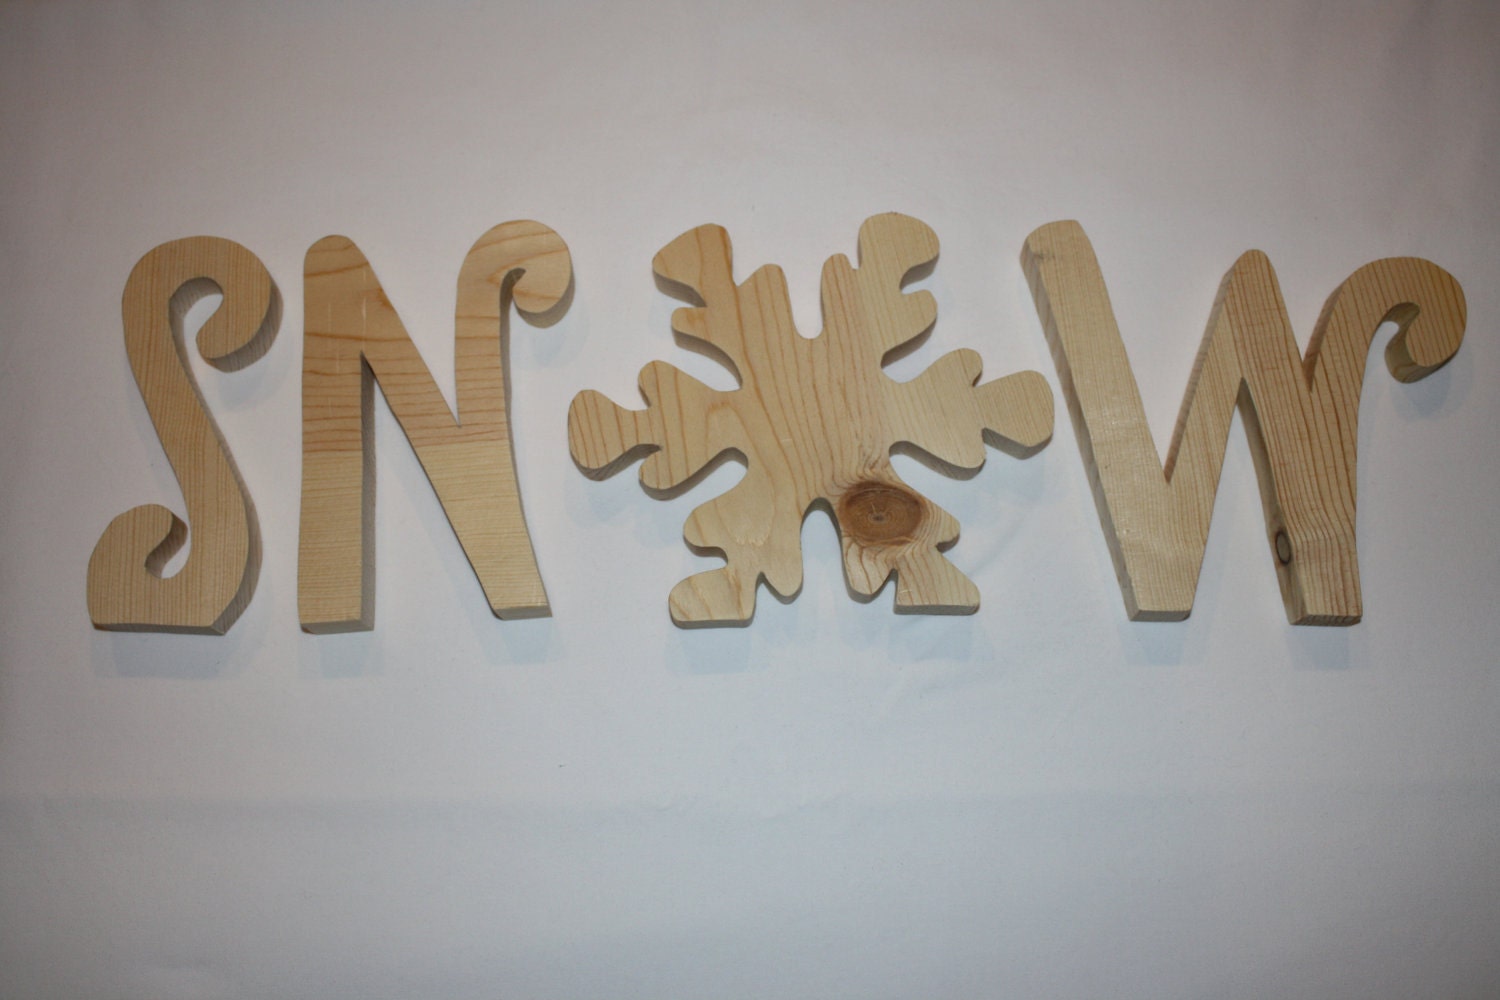 Snow unfinished wood word to decorate you home for the season 6" tall (small snow)